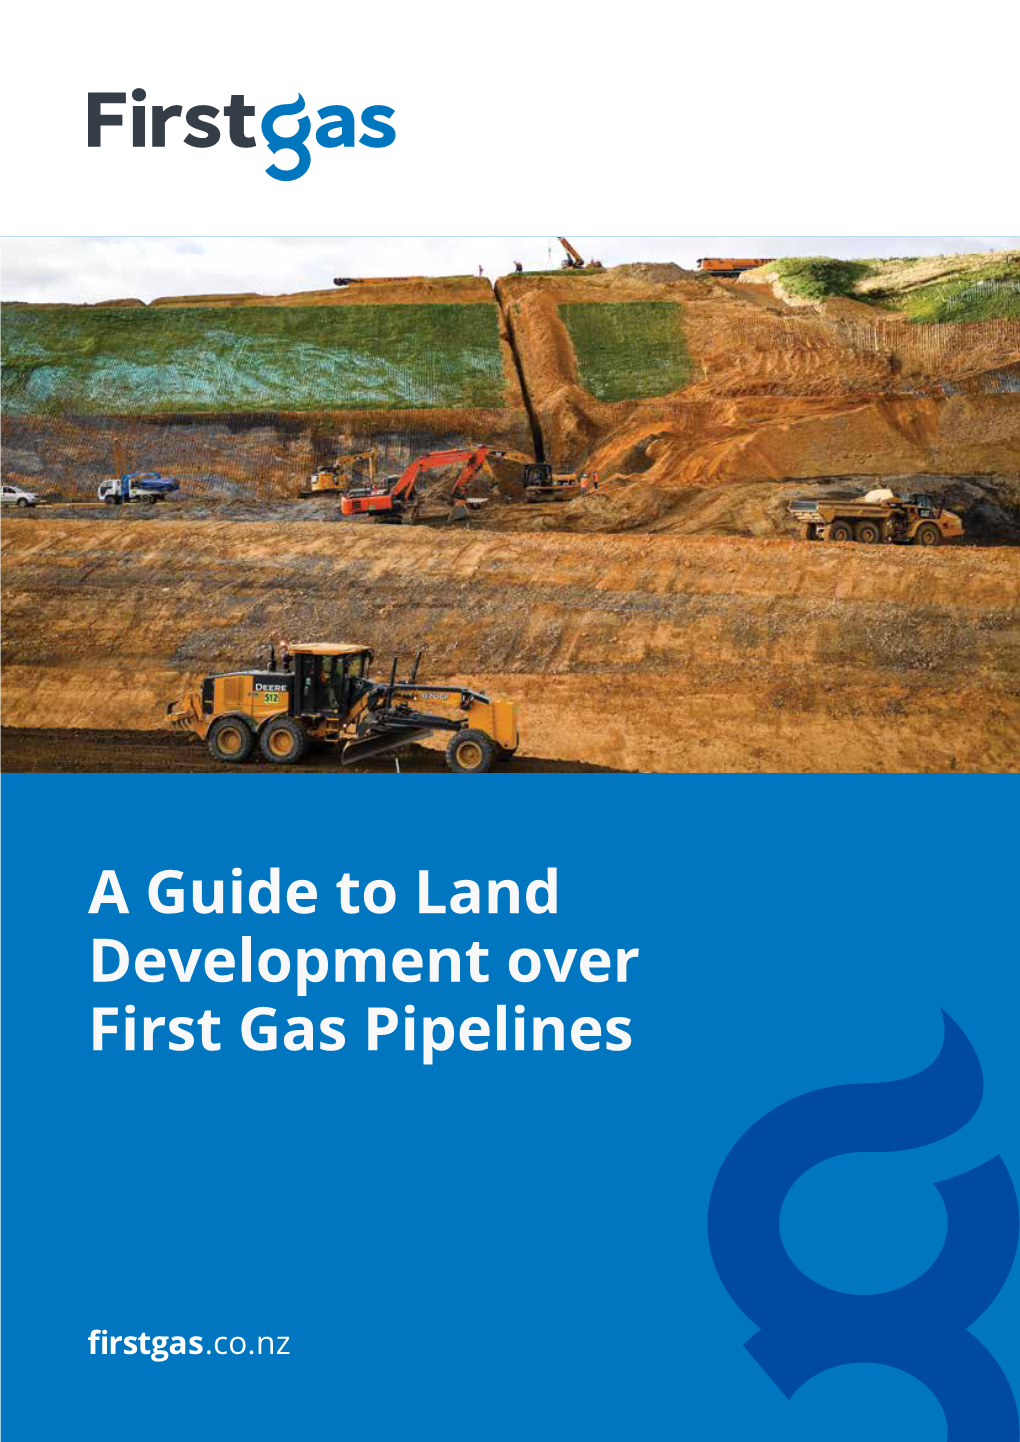 A Guide to Land Development Over First Gas Pipelines